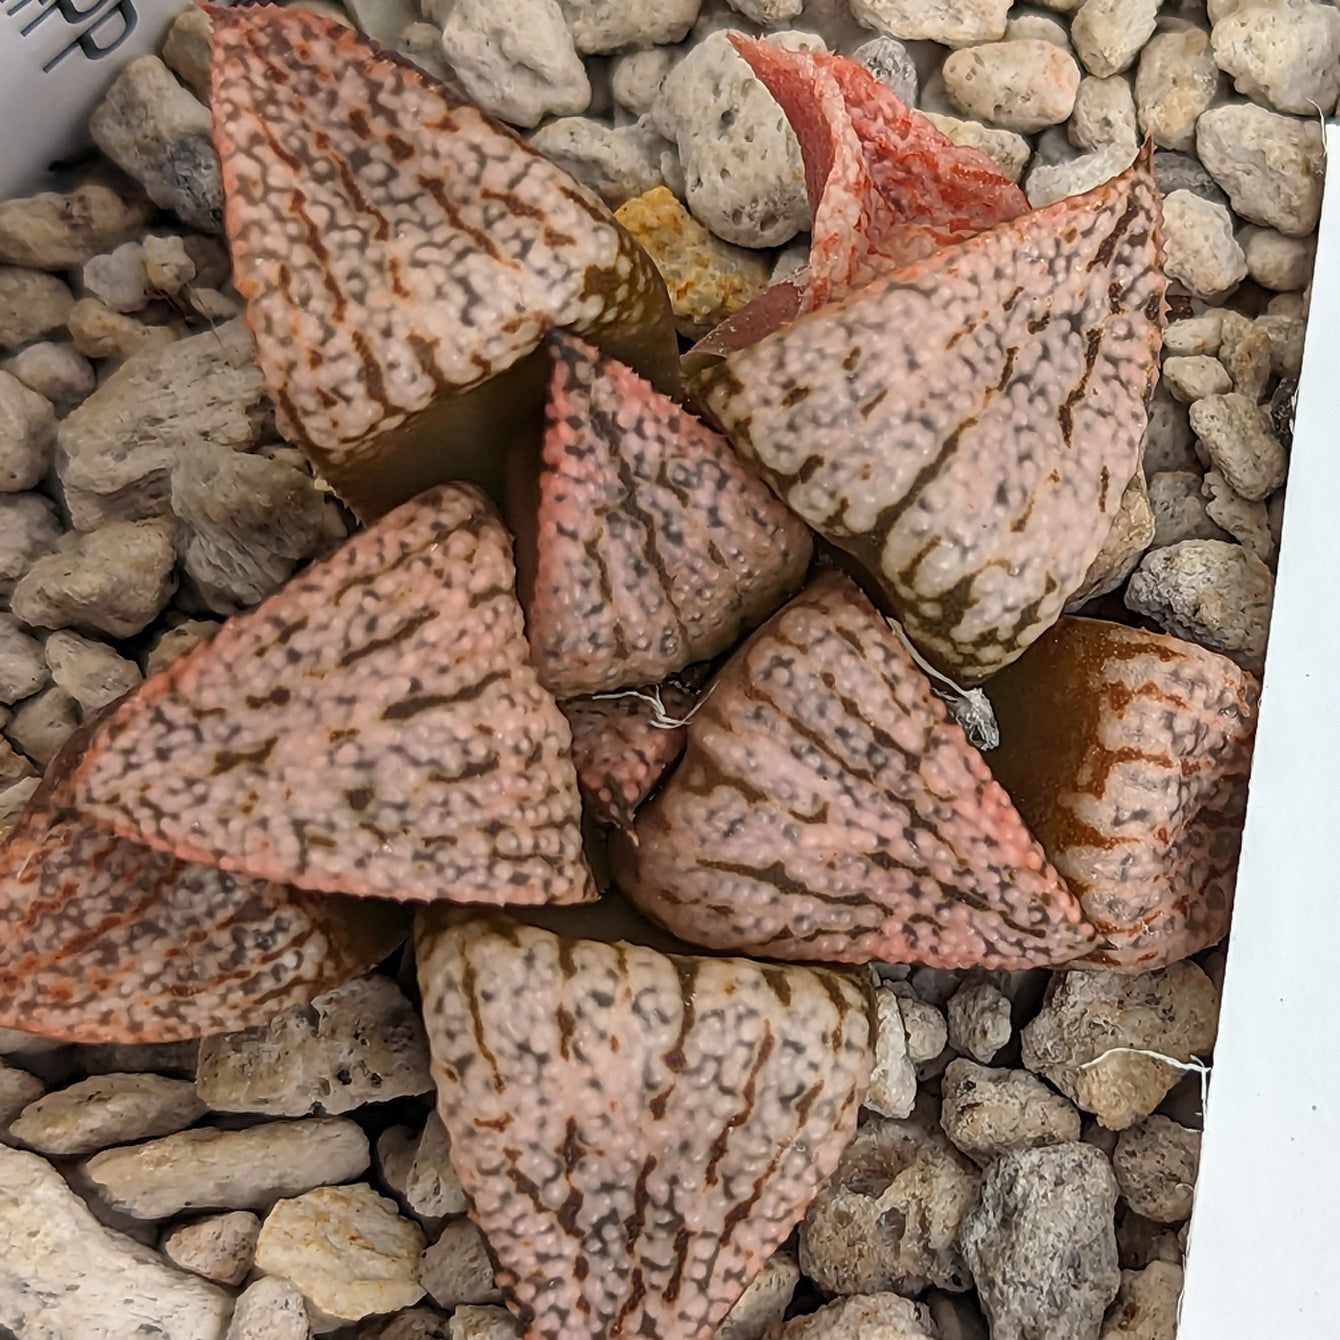 Haworthia "PP332" picta x Empress hybrid series #20 SOLD OUT